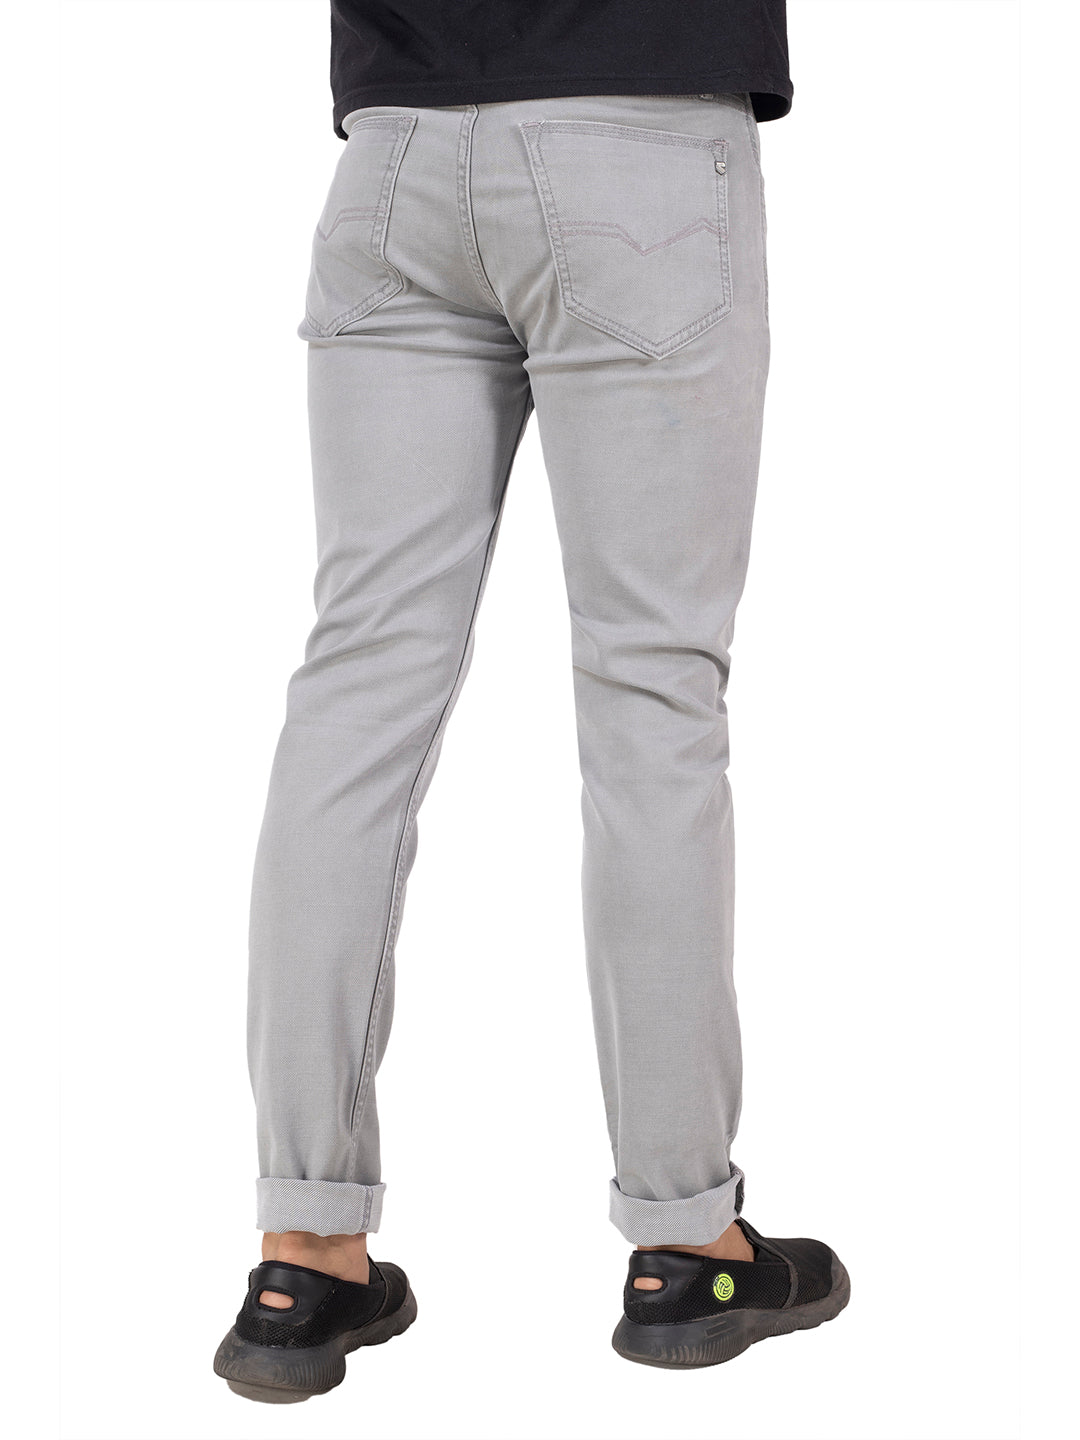 PLAIN COLORED JEANS <BR> Berlin- grey